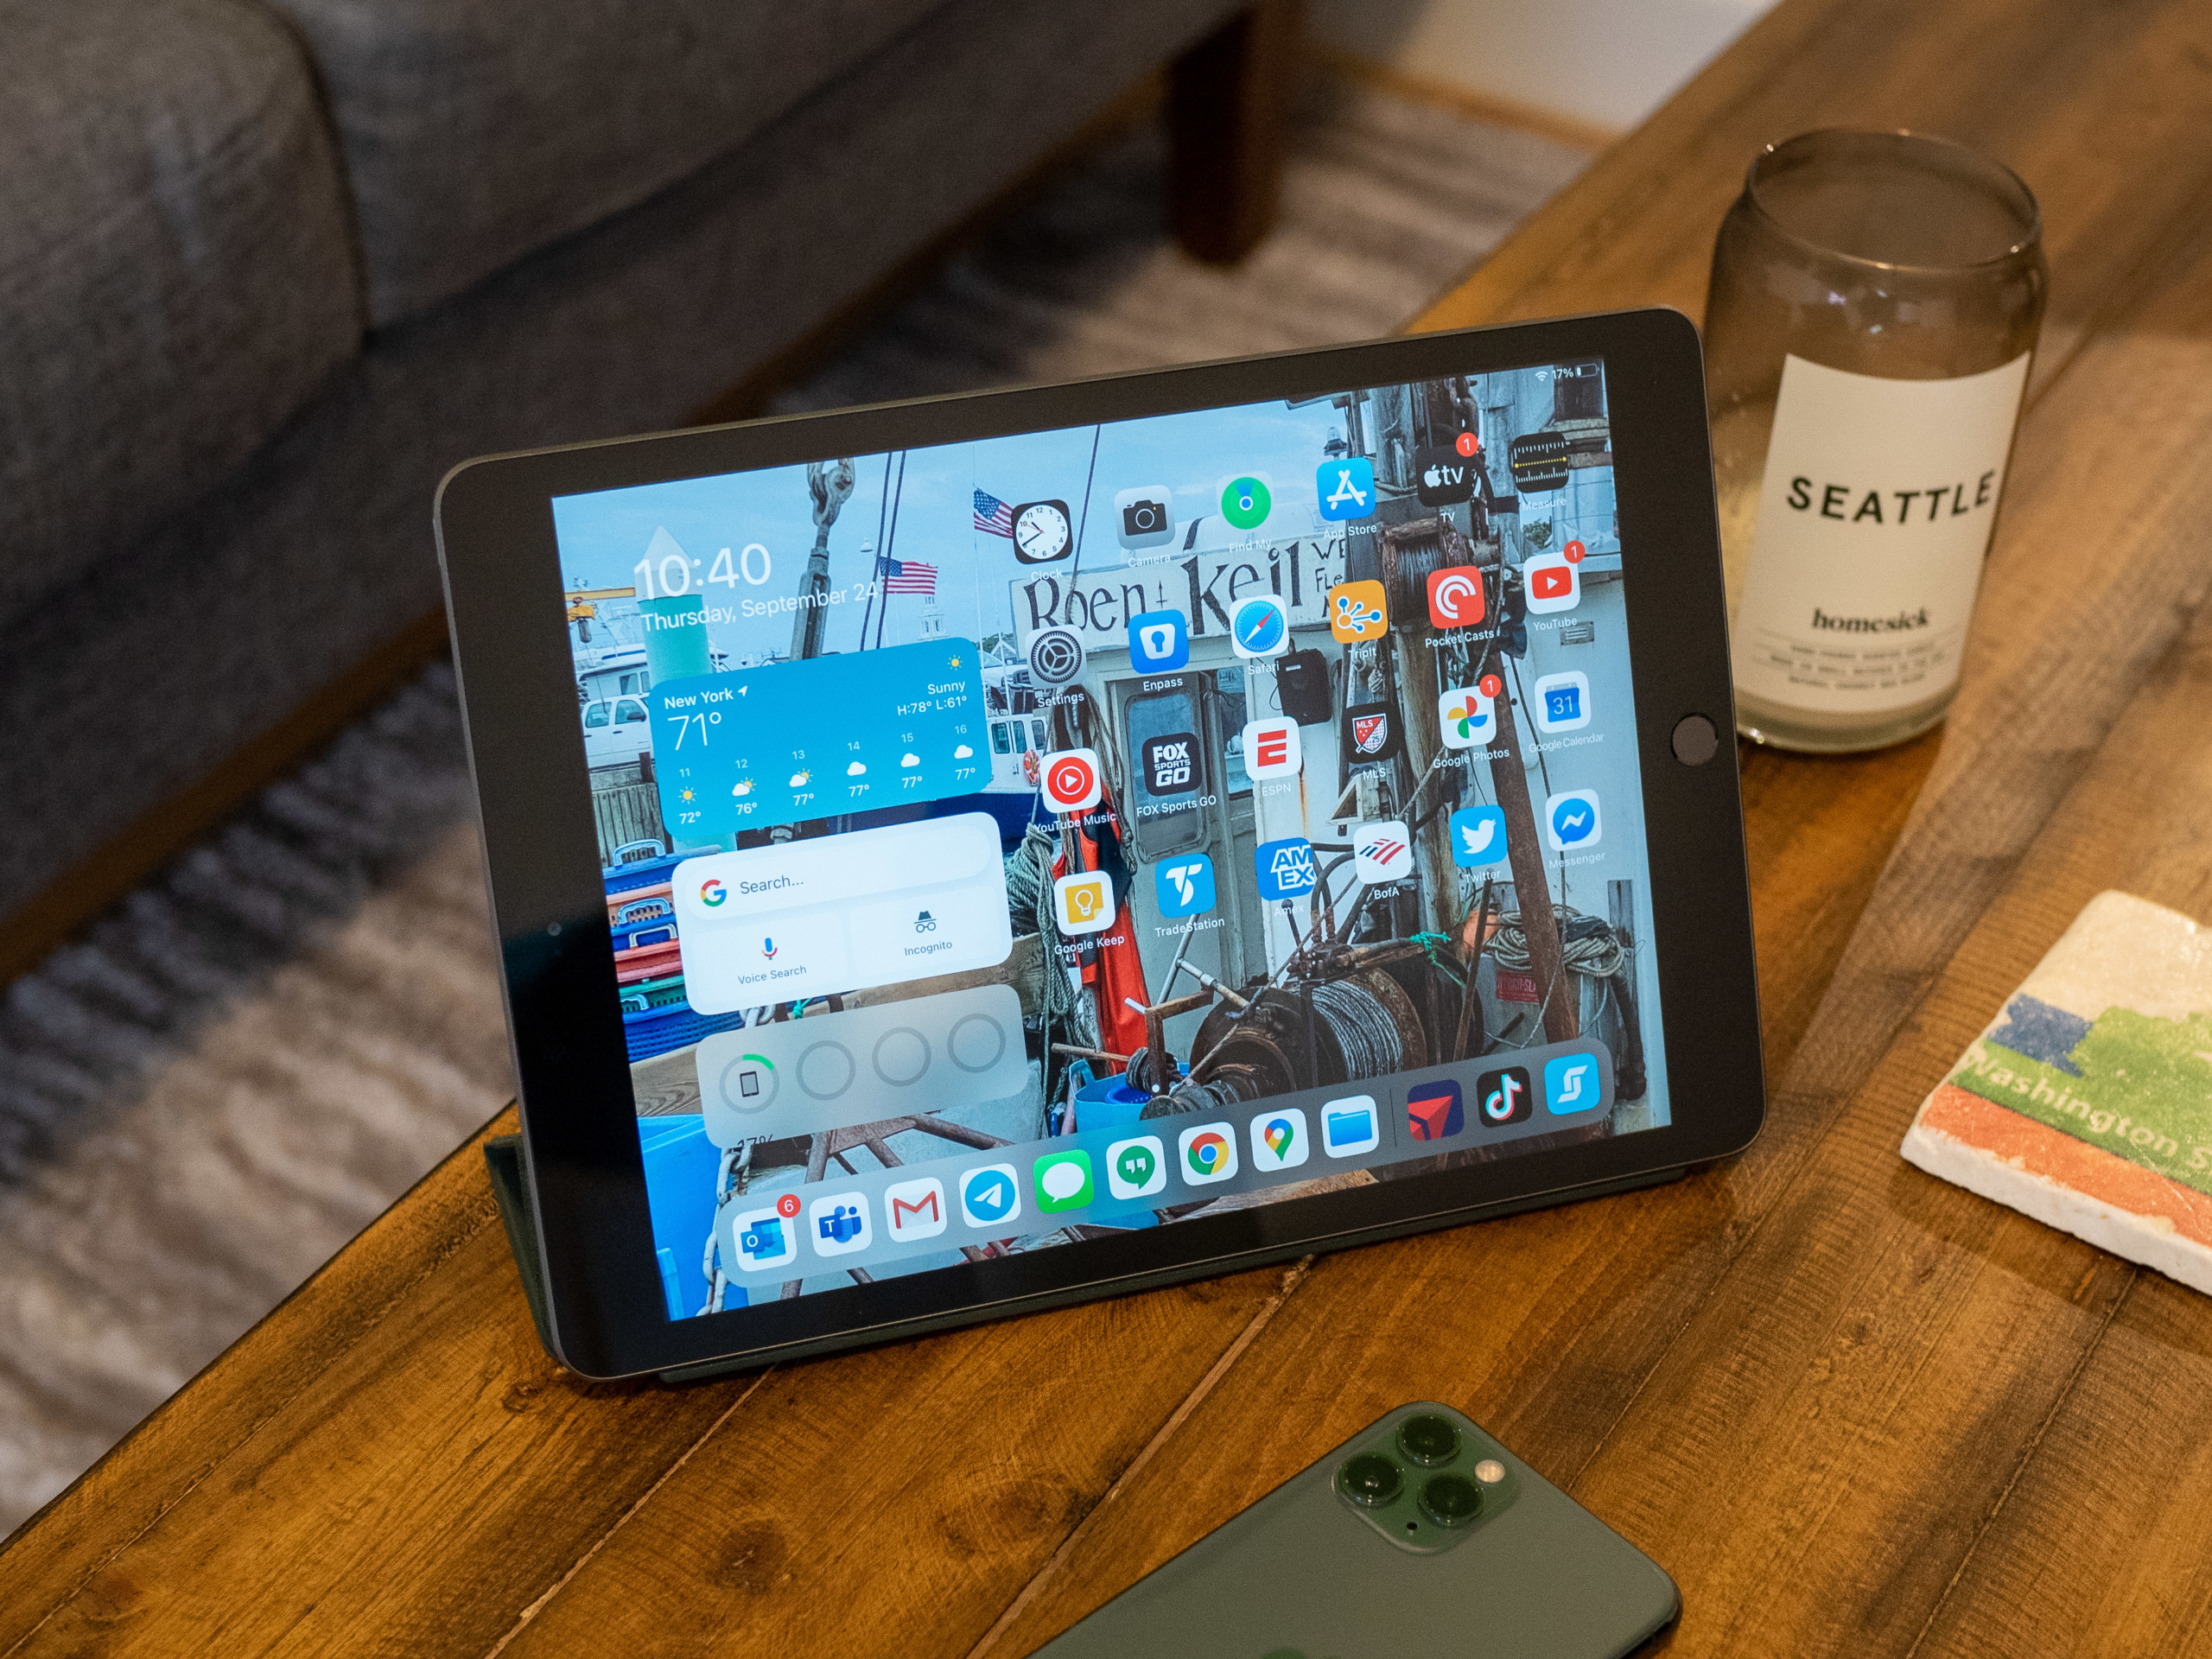 Apple iPad 2020 (10.2-inch, 8th Gen) Review: Great for $329